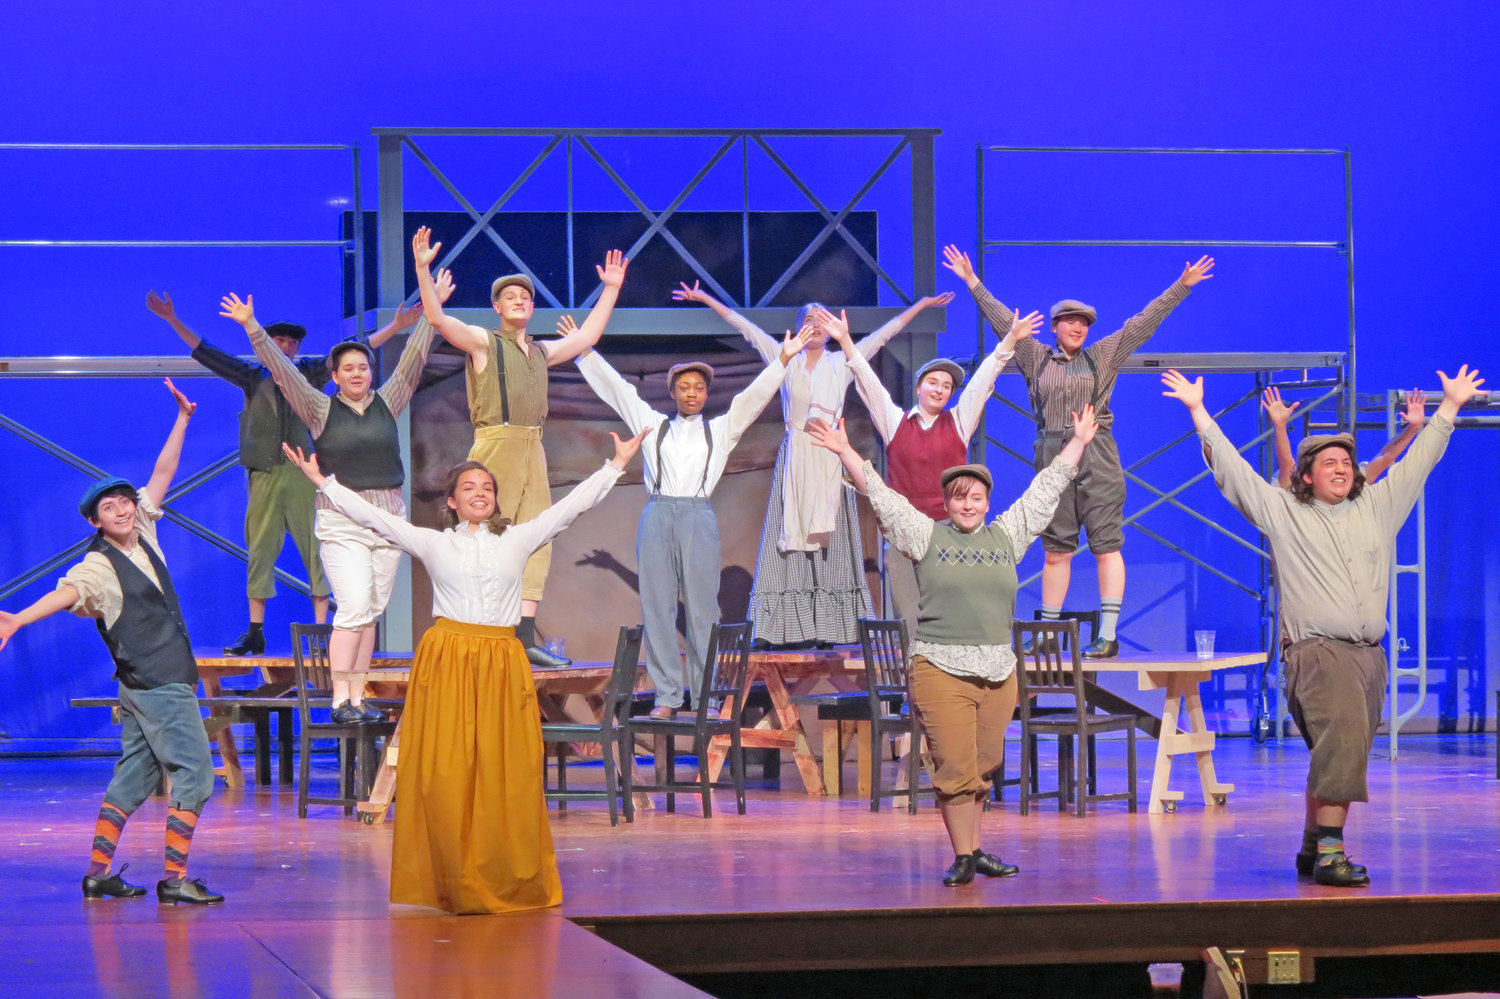 STEALING THE SHOW — The cast of Rome Free Academy's Newsies takes the stage during rehearsal for their upcoming show, to be performed at 7 p.m. Thursday, Friday and Saturday at RFA auditorium.